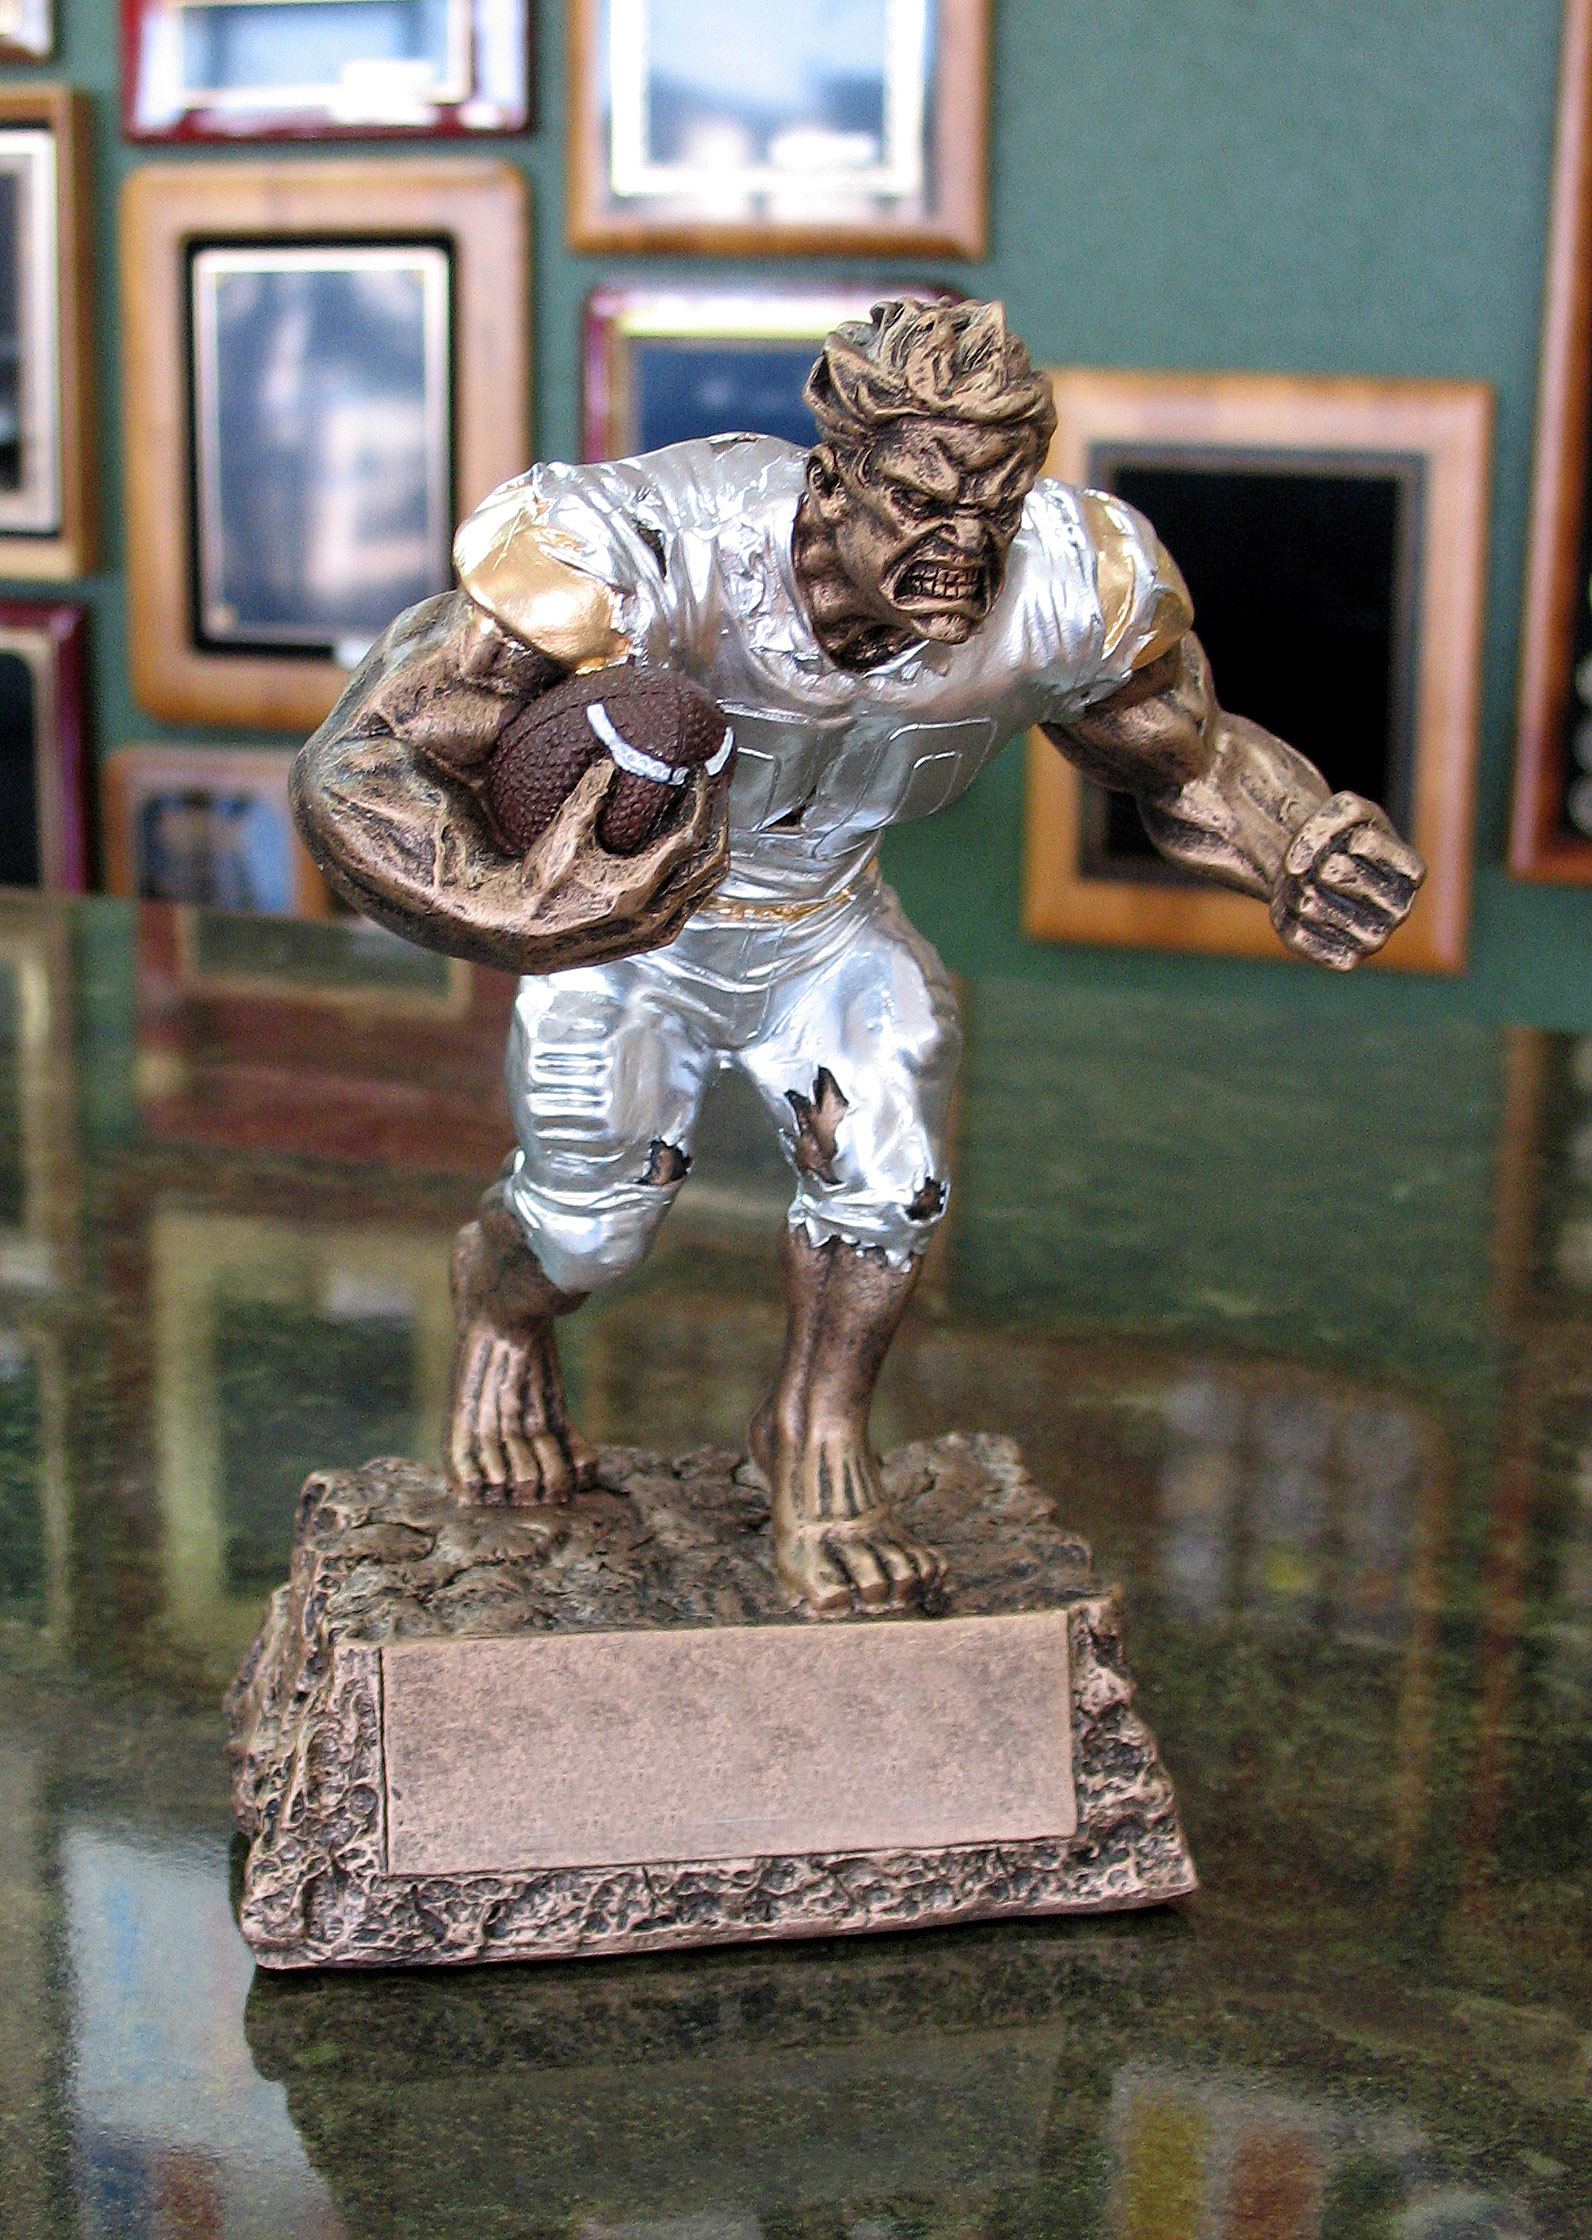 Copper Plate with Black Engraving individual plates for Fantasy Trophies